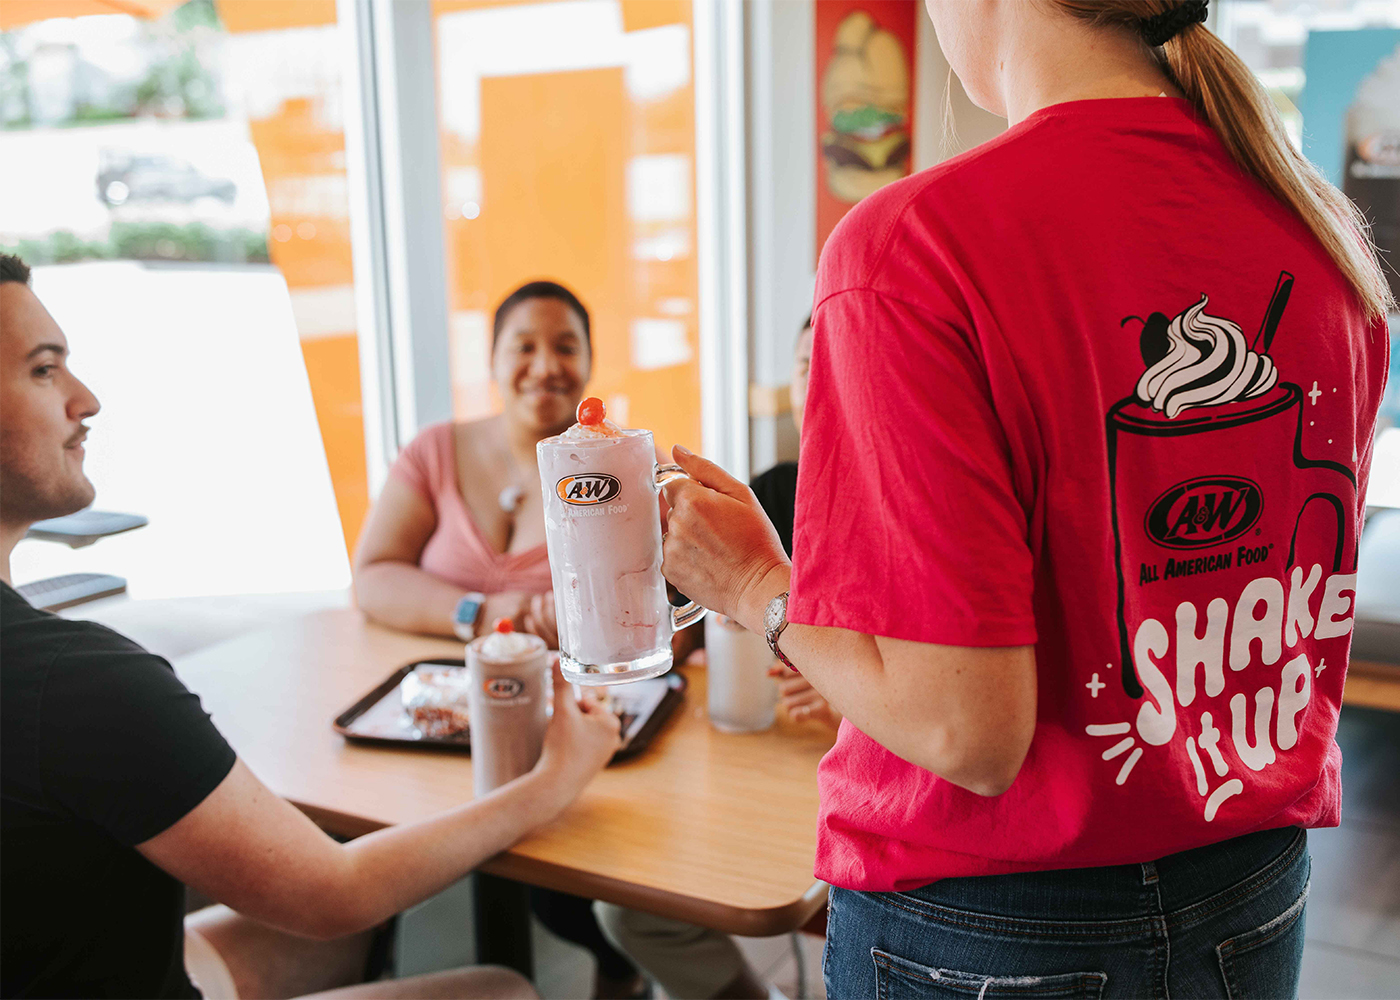 A&W Team Member bringing a Shake to a table.